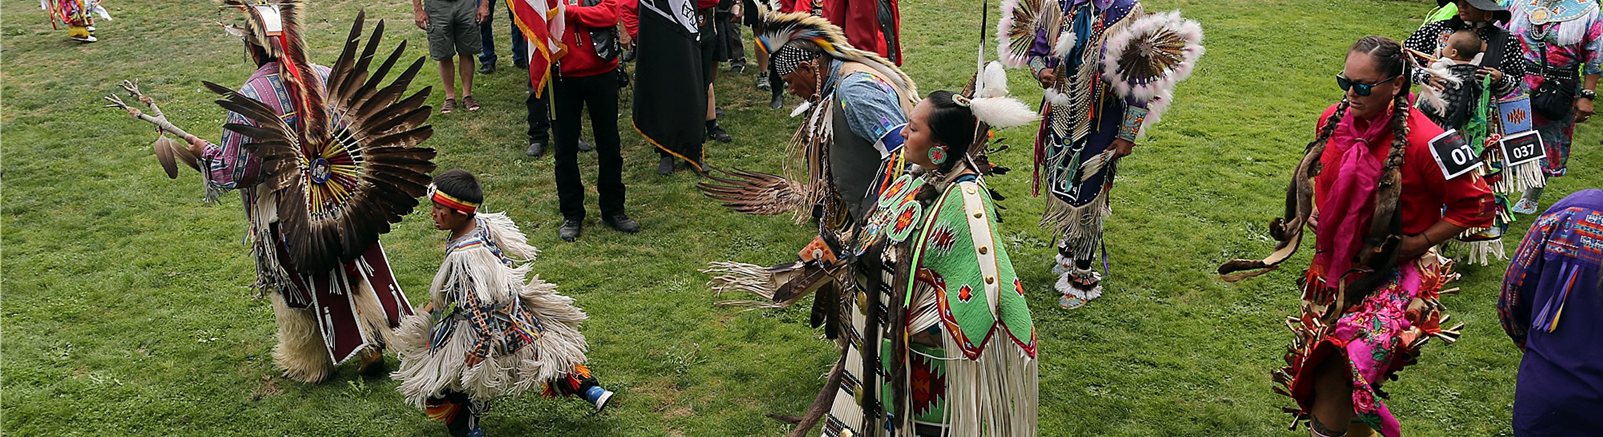 native american pow wow grand entry dancers